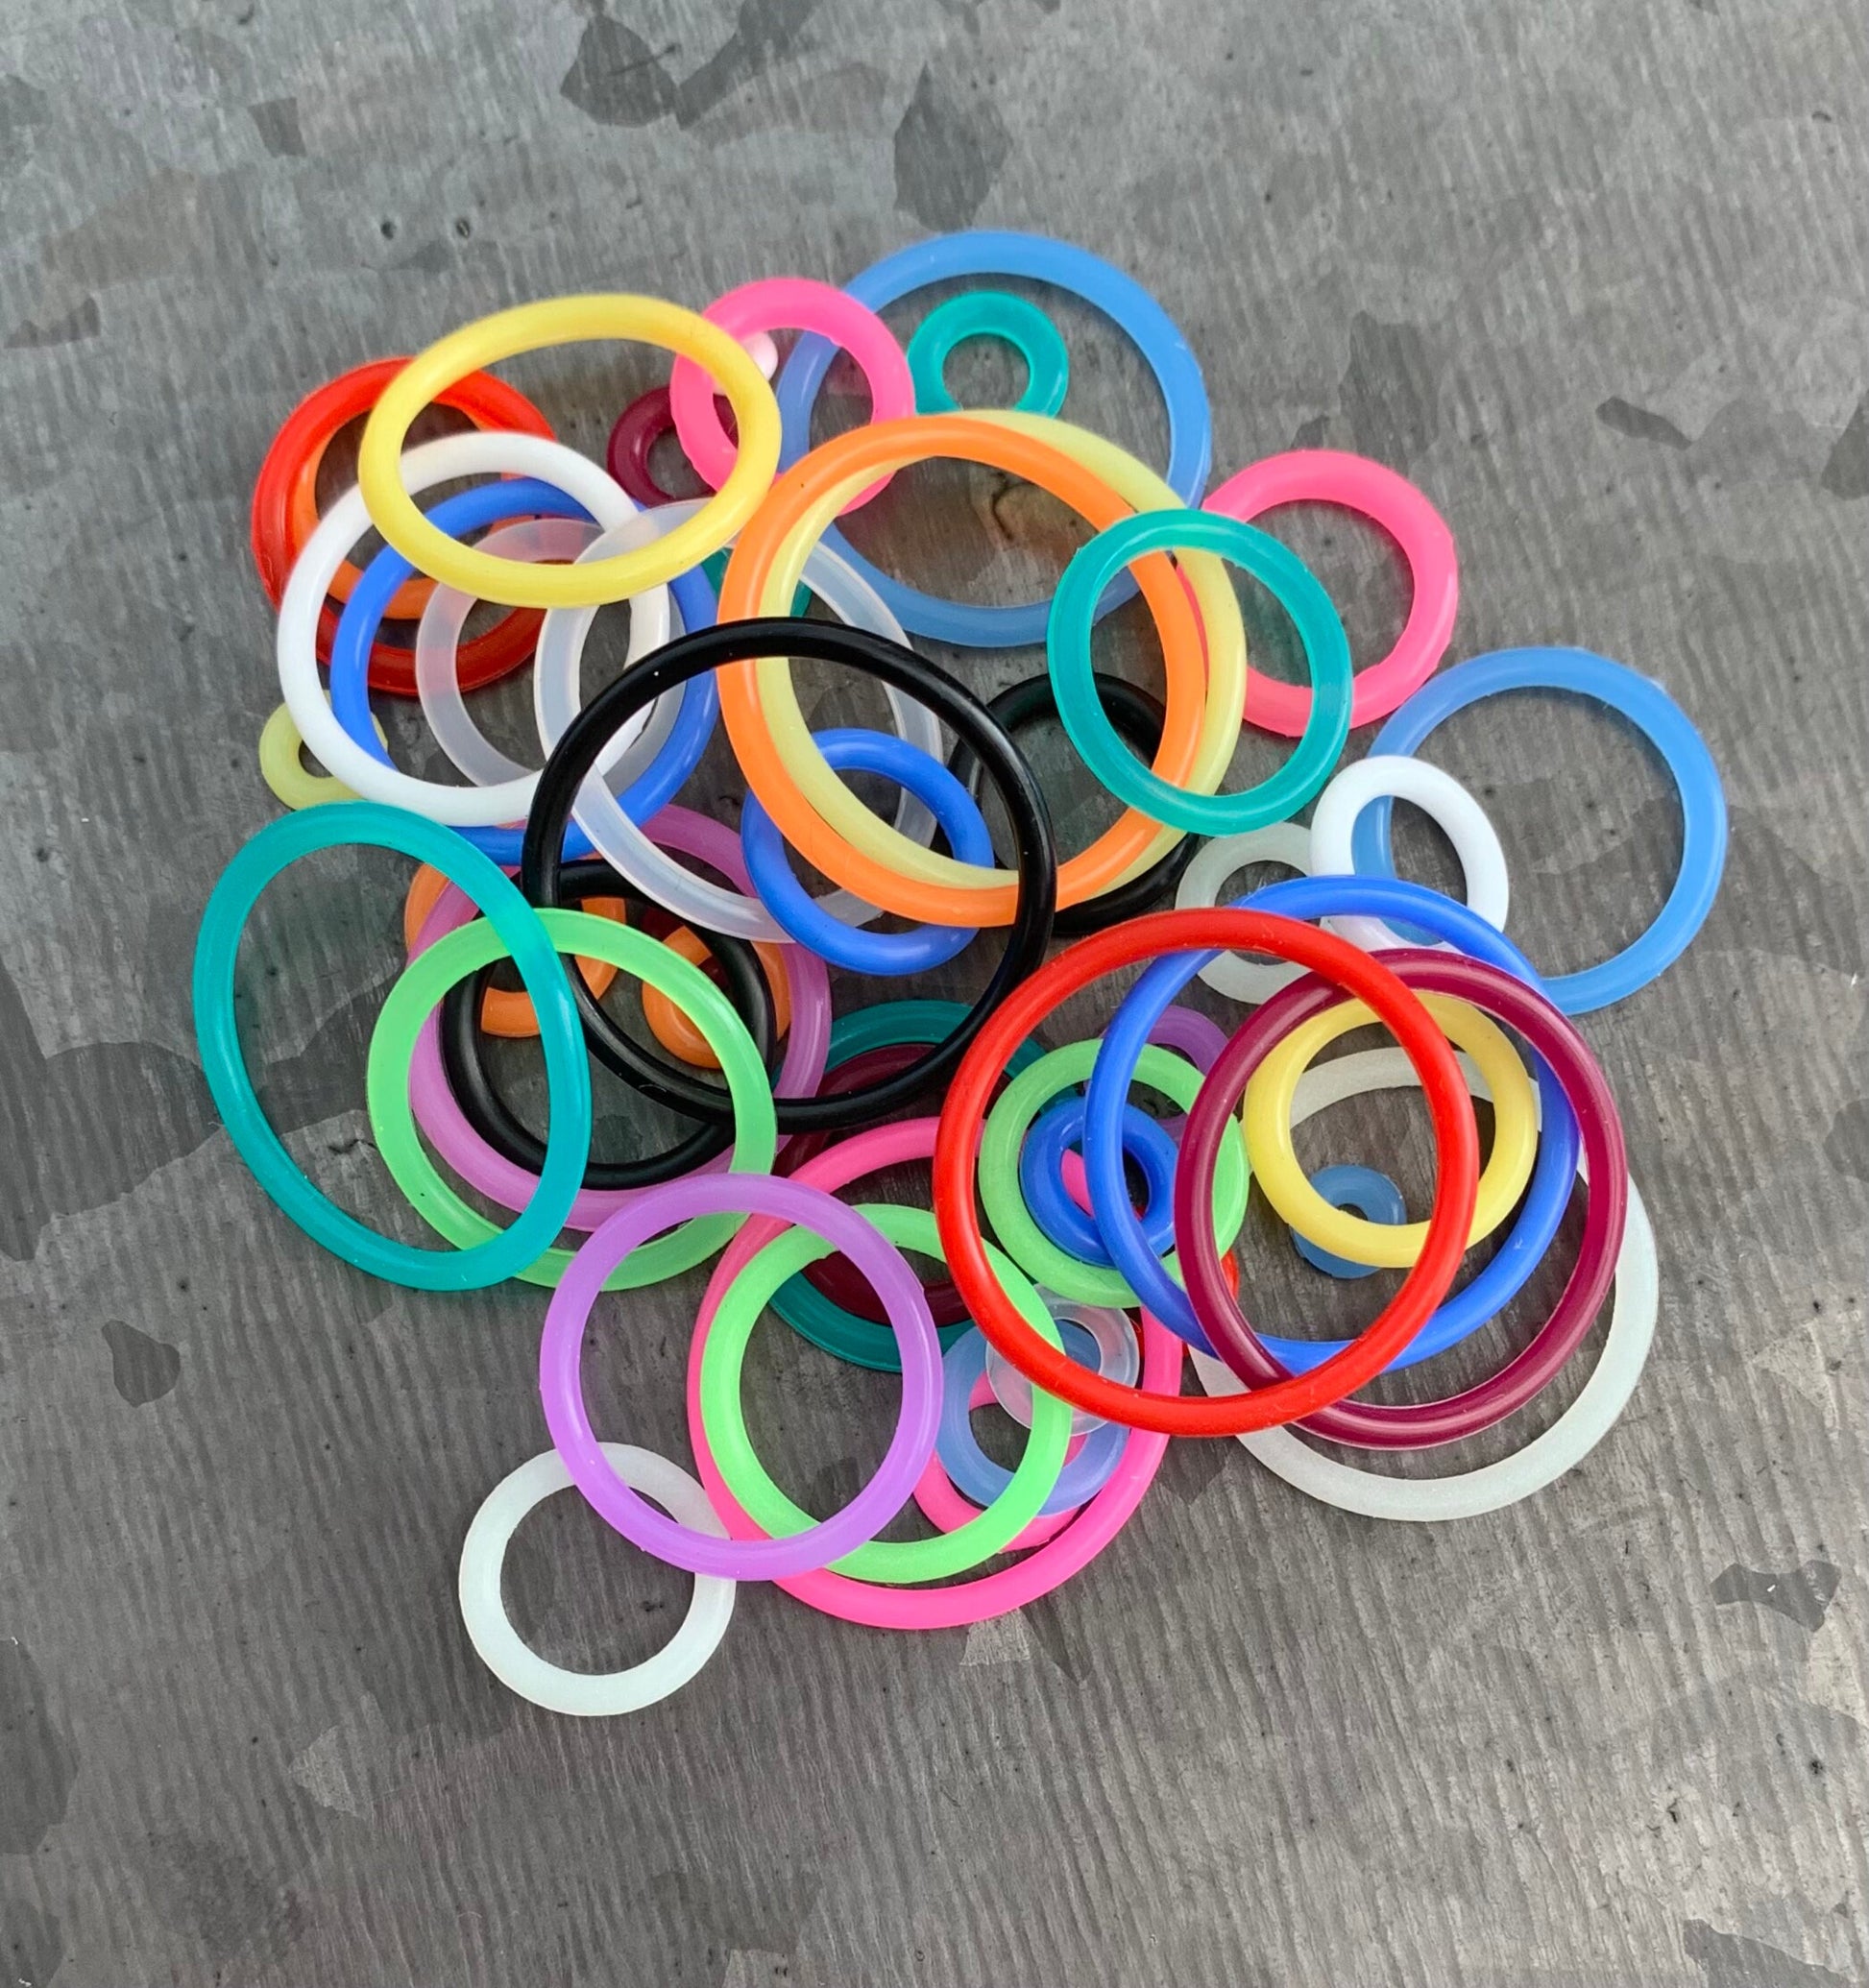 10 pack of Green Replacement O-Rings Bands for Plugs or Tunnels - 13 more colors available!